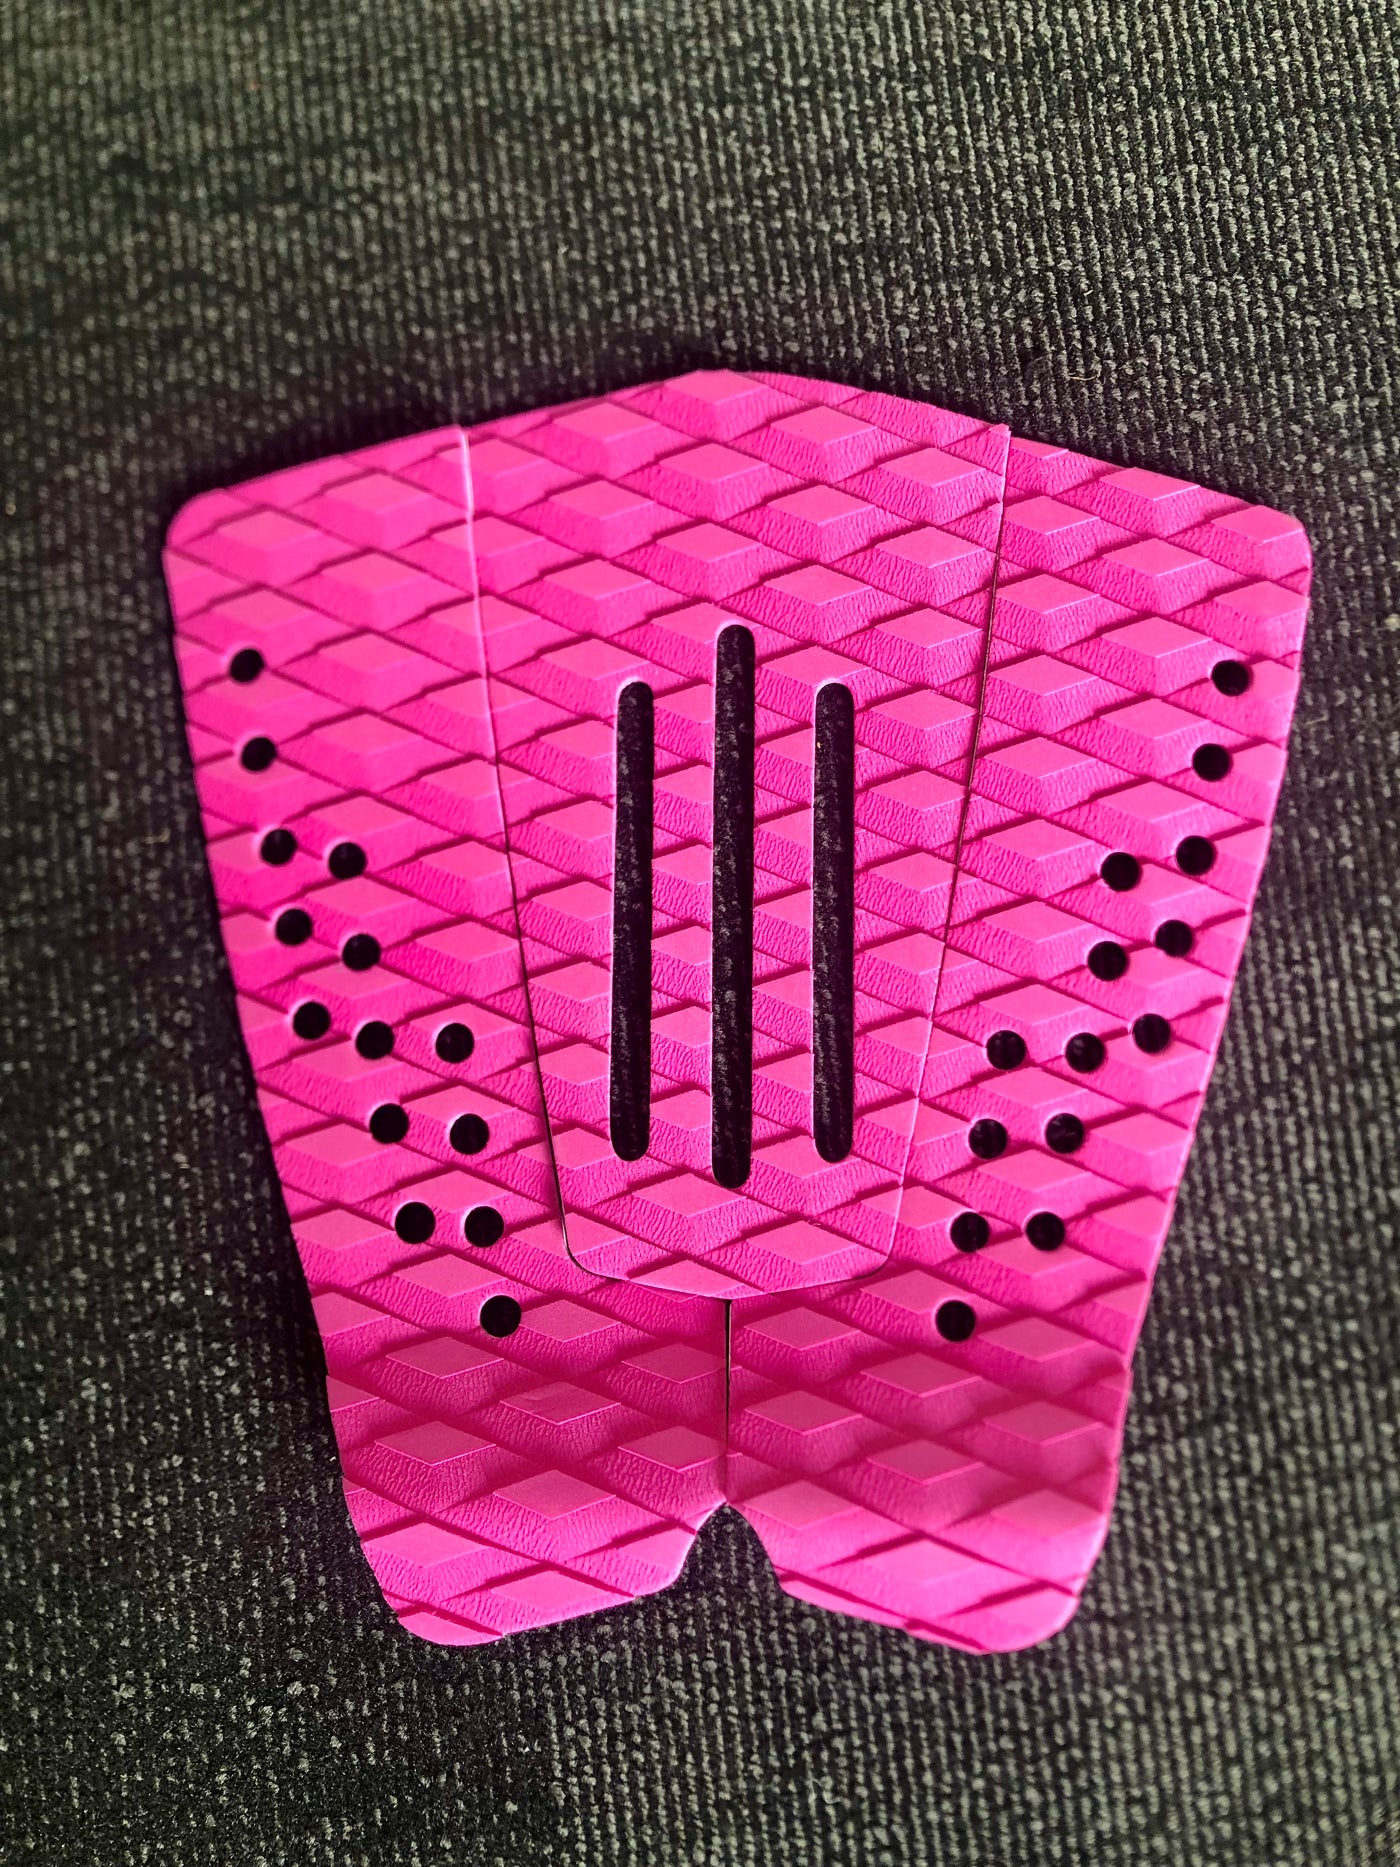 Surfboard Tail Pad Pink 3 Pce, Free Shipping - Alleydesigns  Pty Ltd                                             ABN: 44165571264